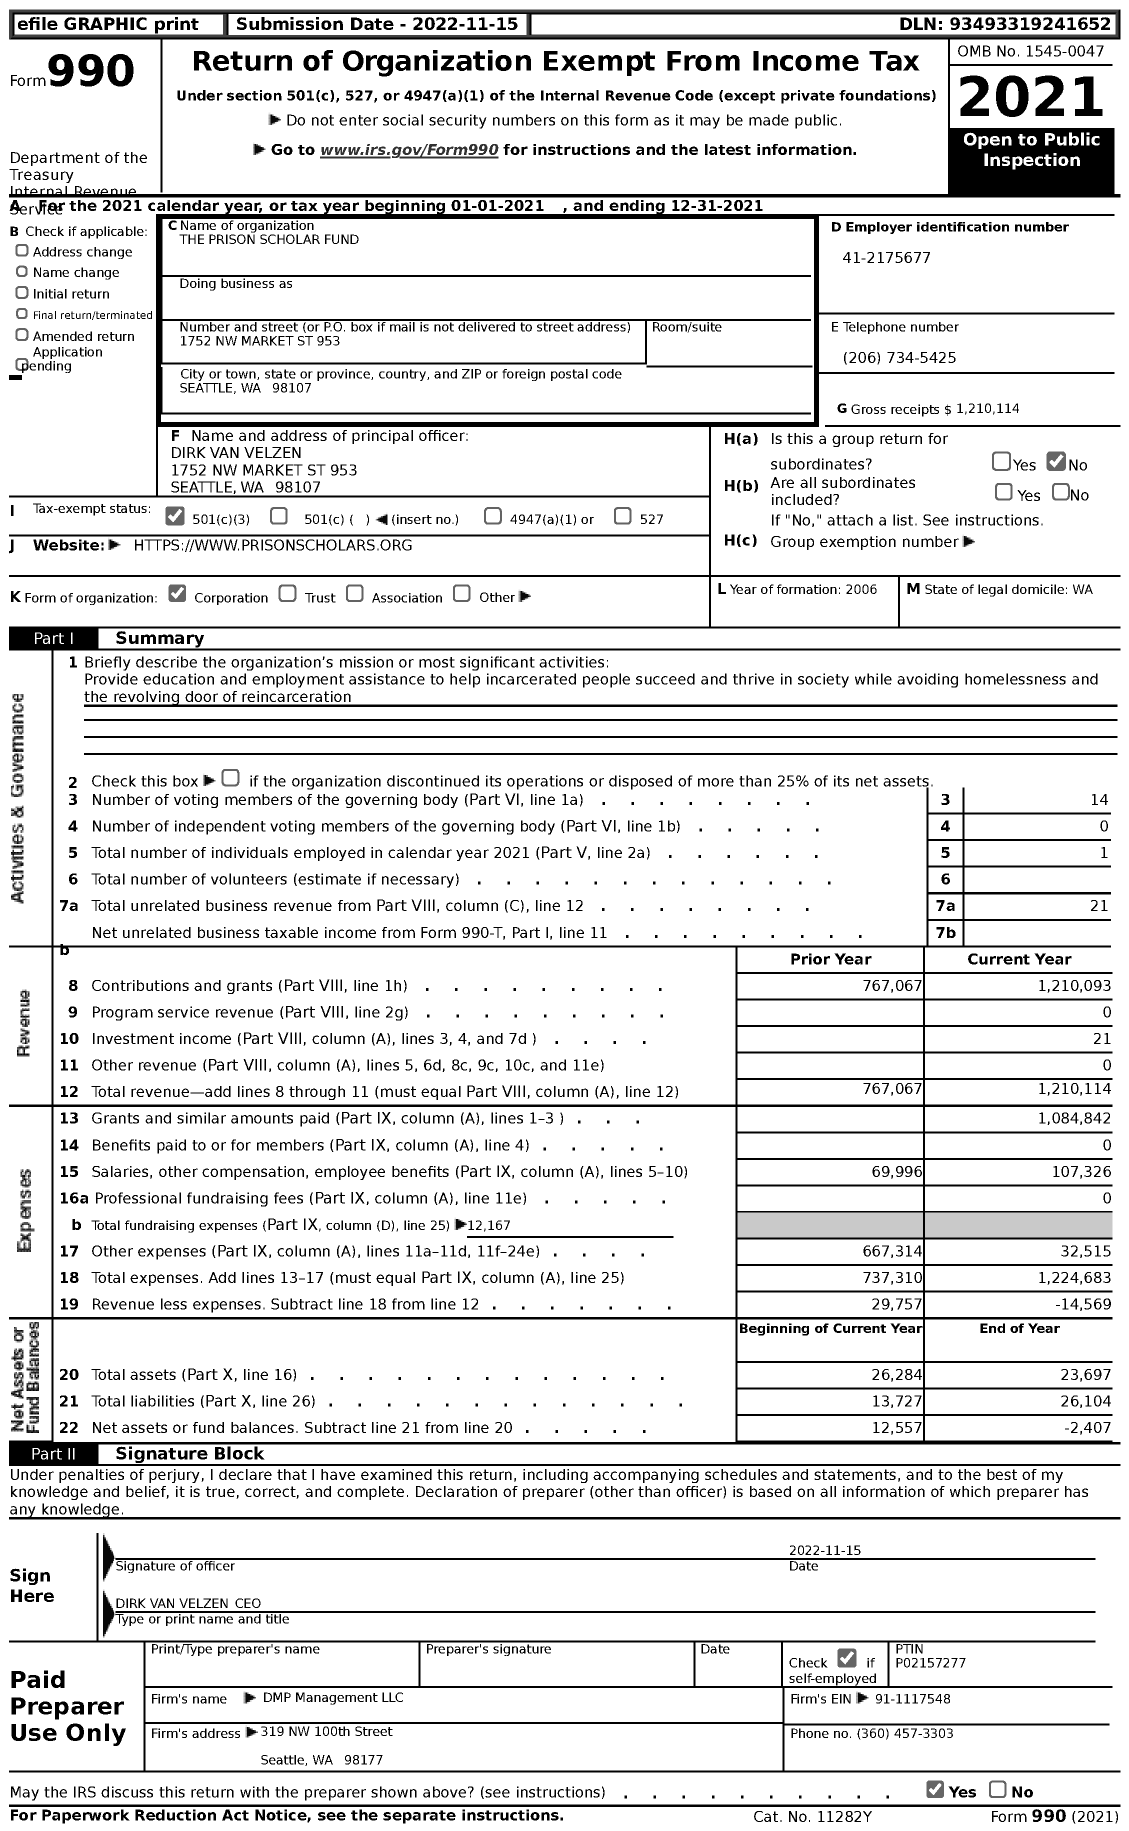 Image of first page of 2021 Form 990 for The Prison Scholar Fund